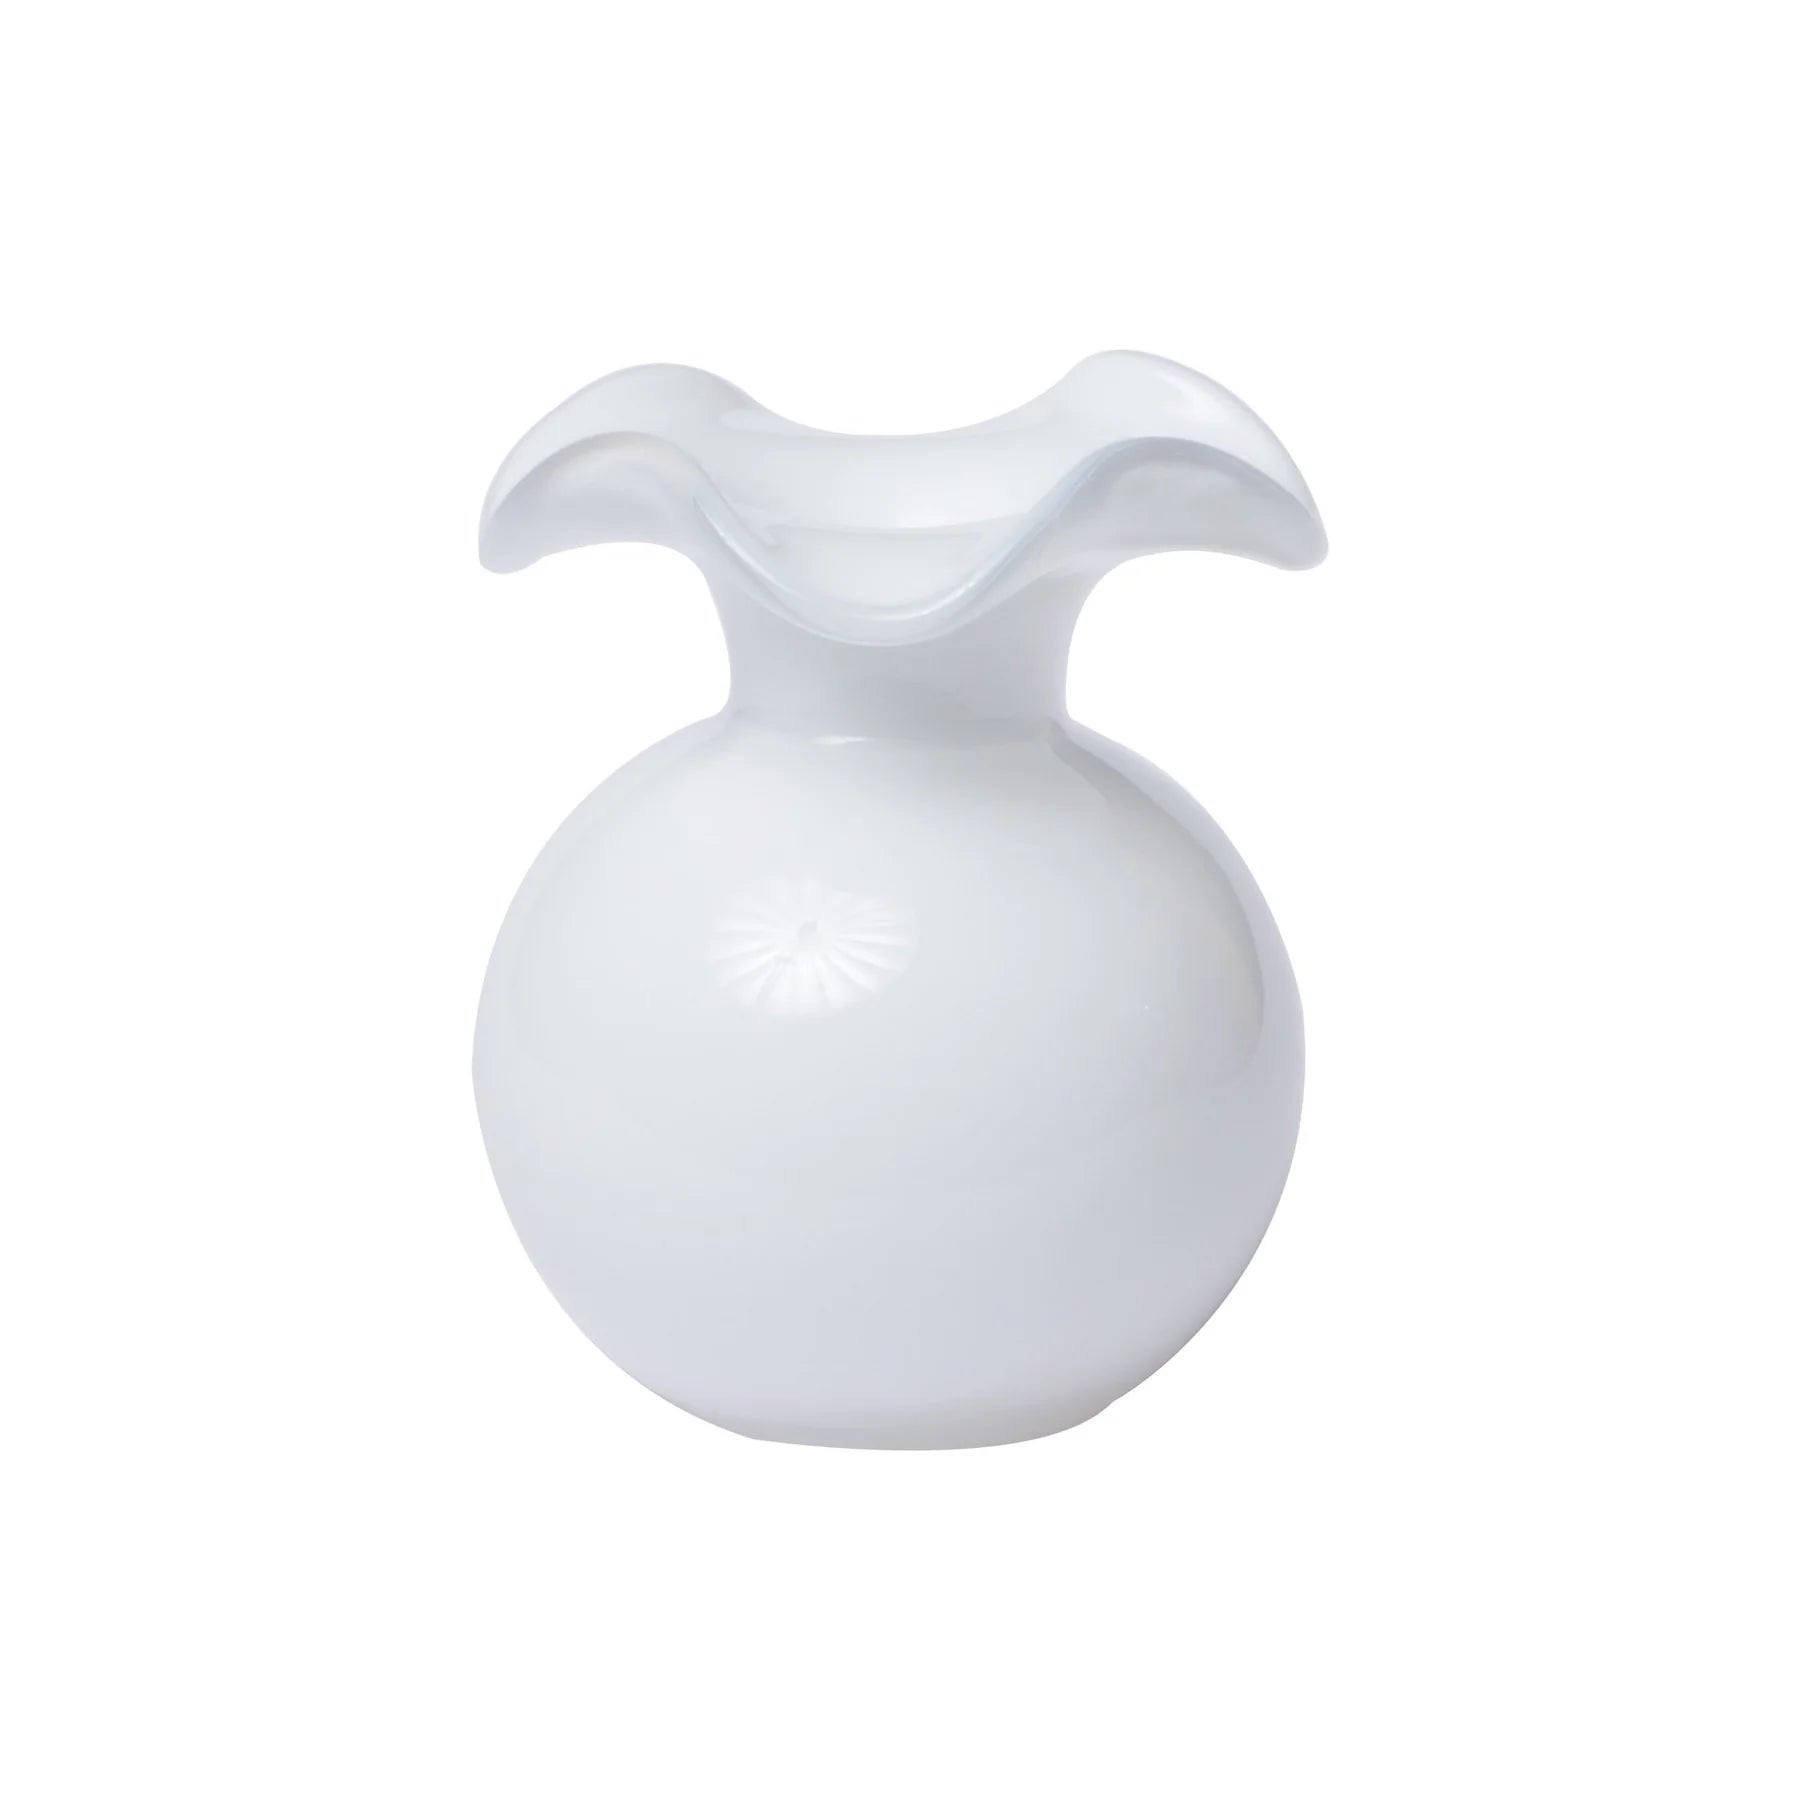 Hibiscus Glass Bud Vase, Available in multiple colors